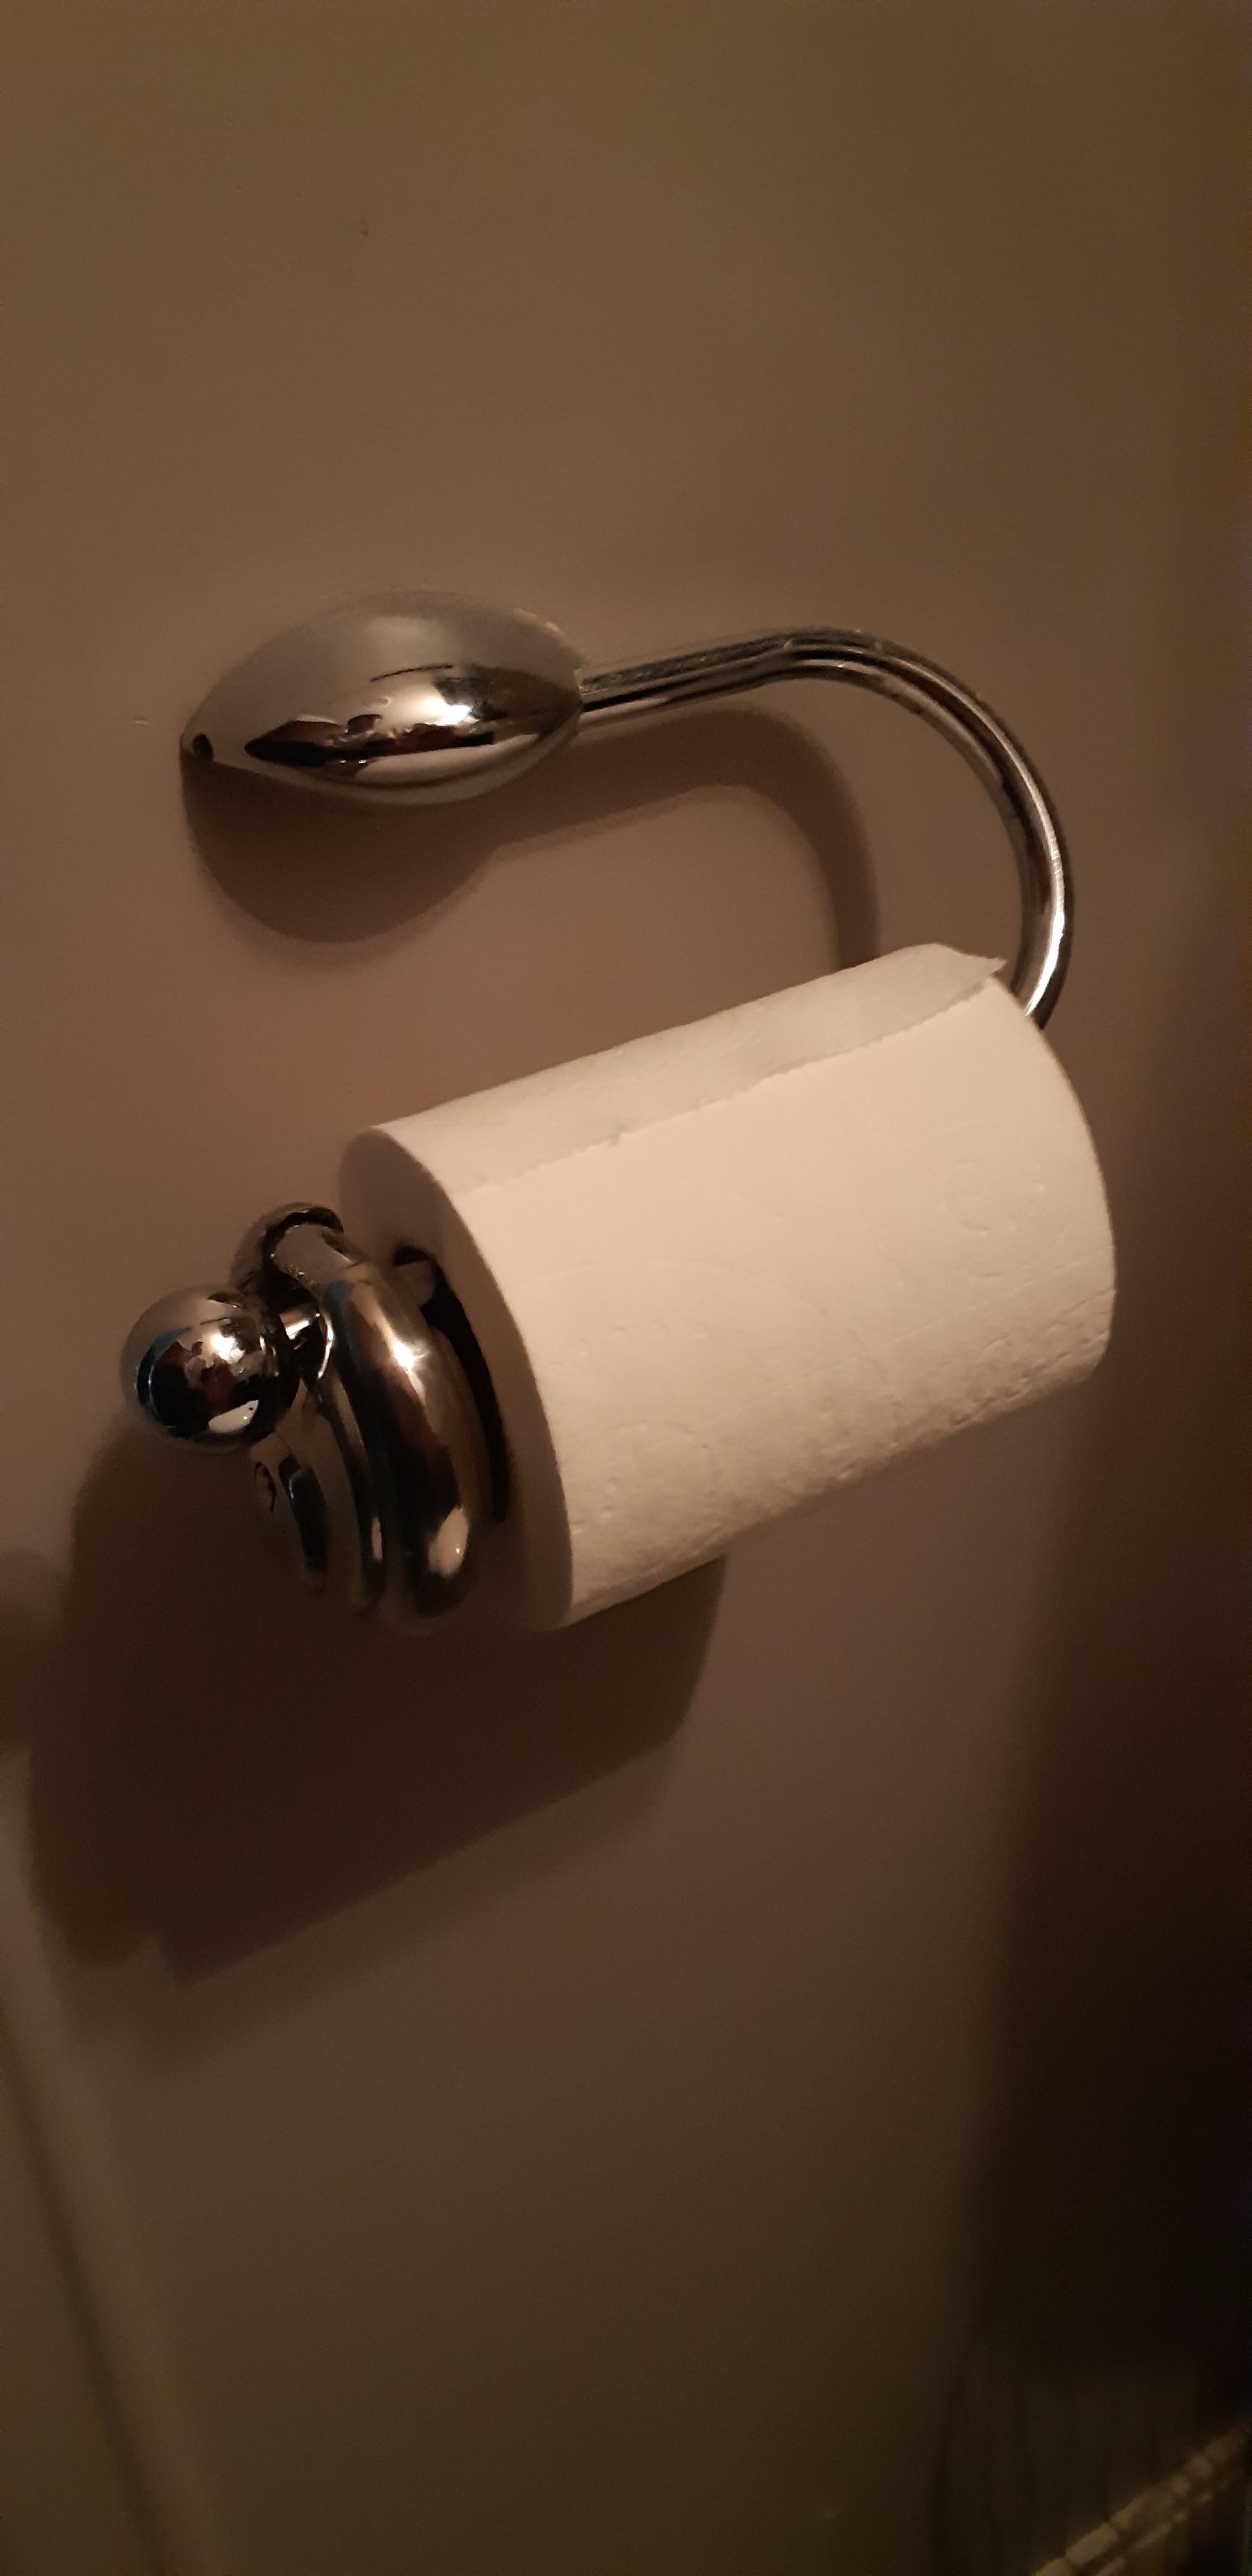 My girlfriend and I have an ongoing argument about which direction the toilet paper roll should face. Today I've decided to assert my dominance with a padlock.